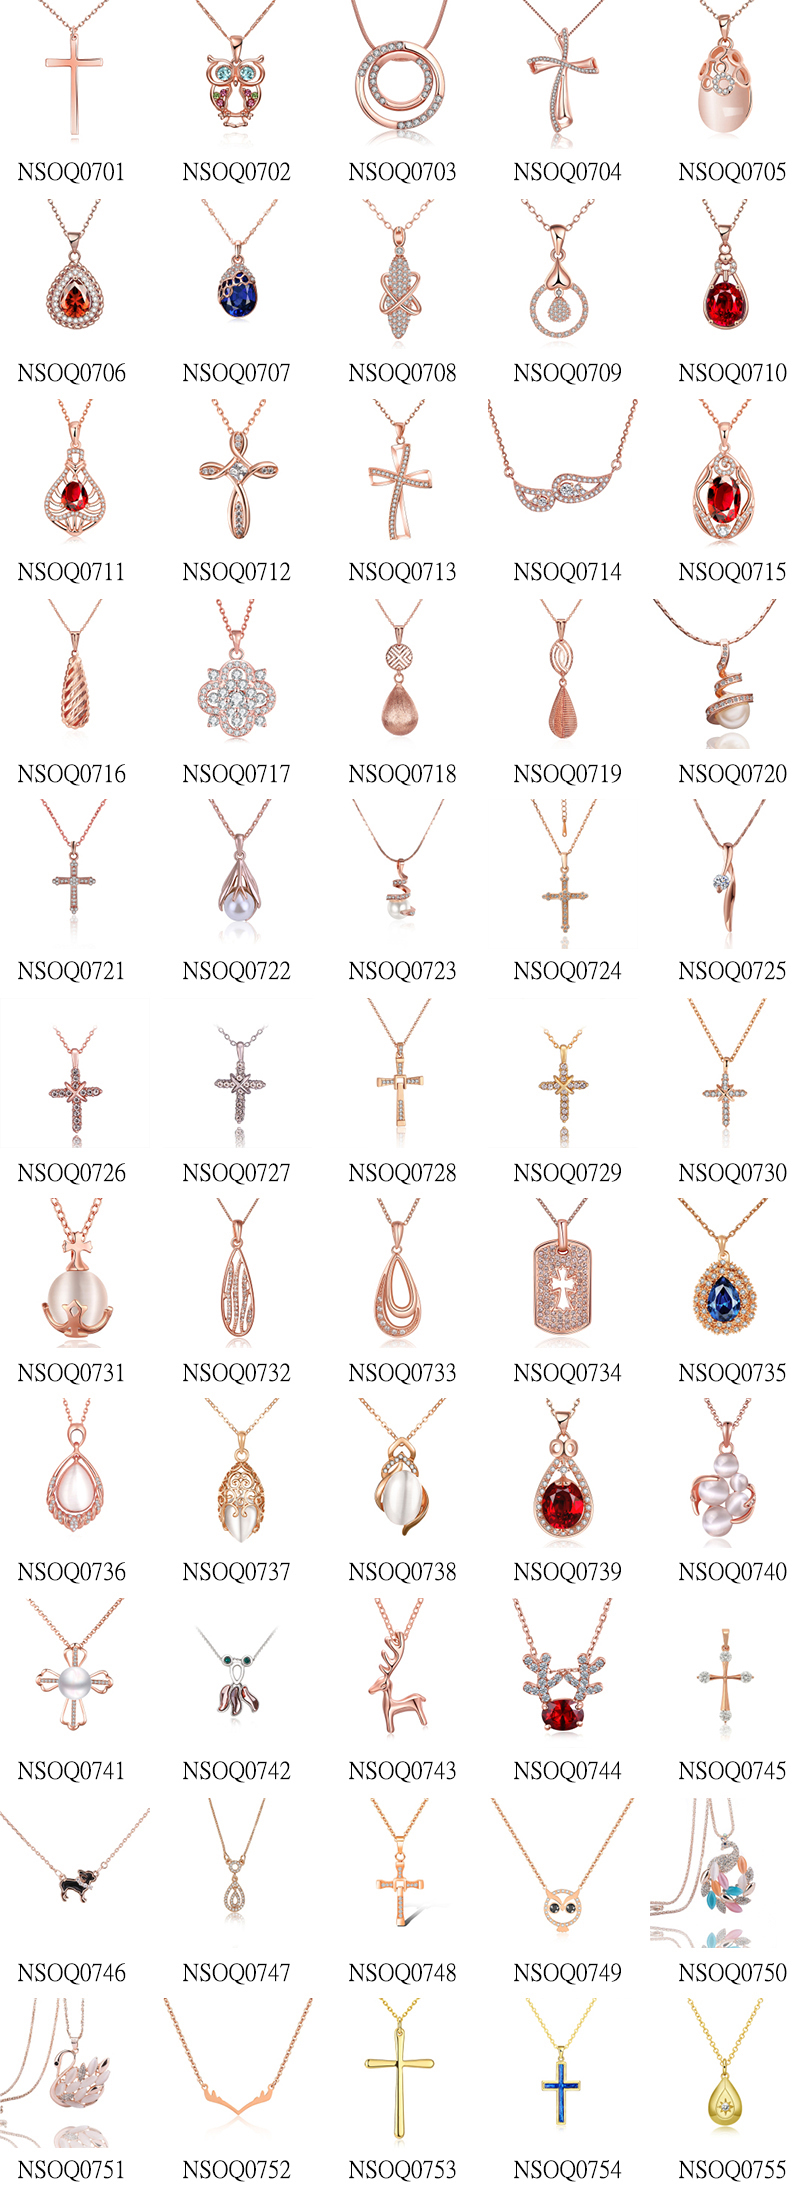 255 Vintage Cross Pendant Necklaces and Custom Animal Necklaces You Need to Know